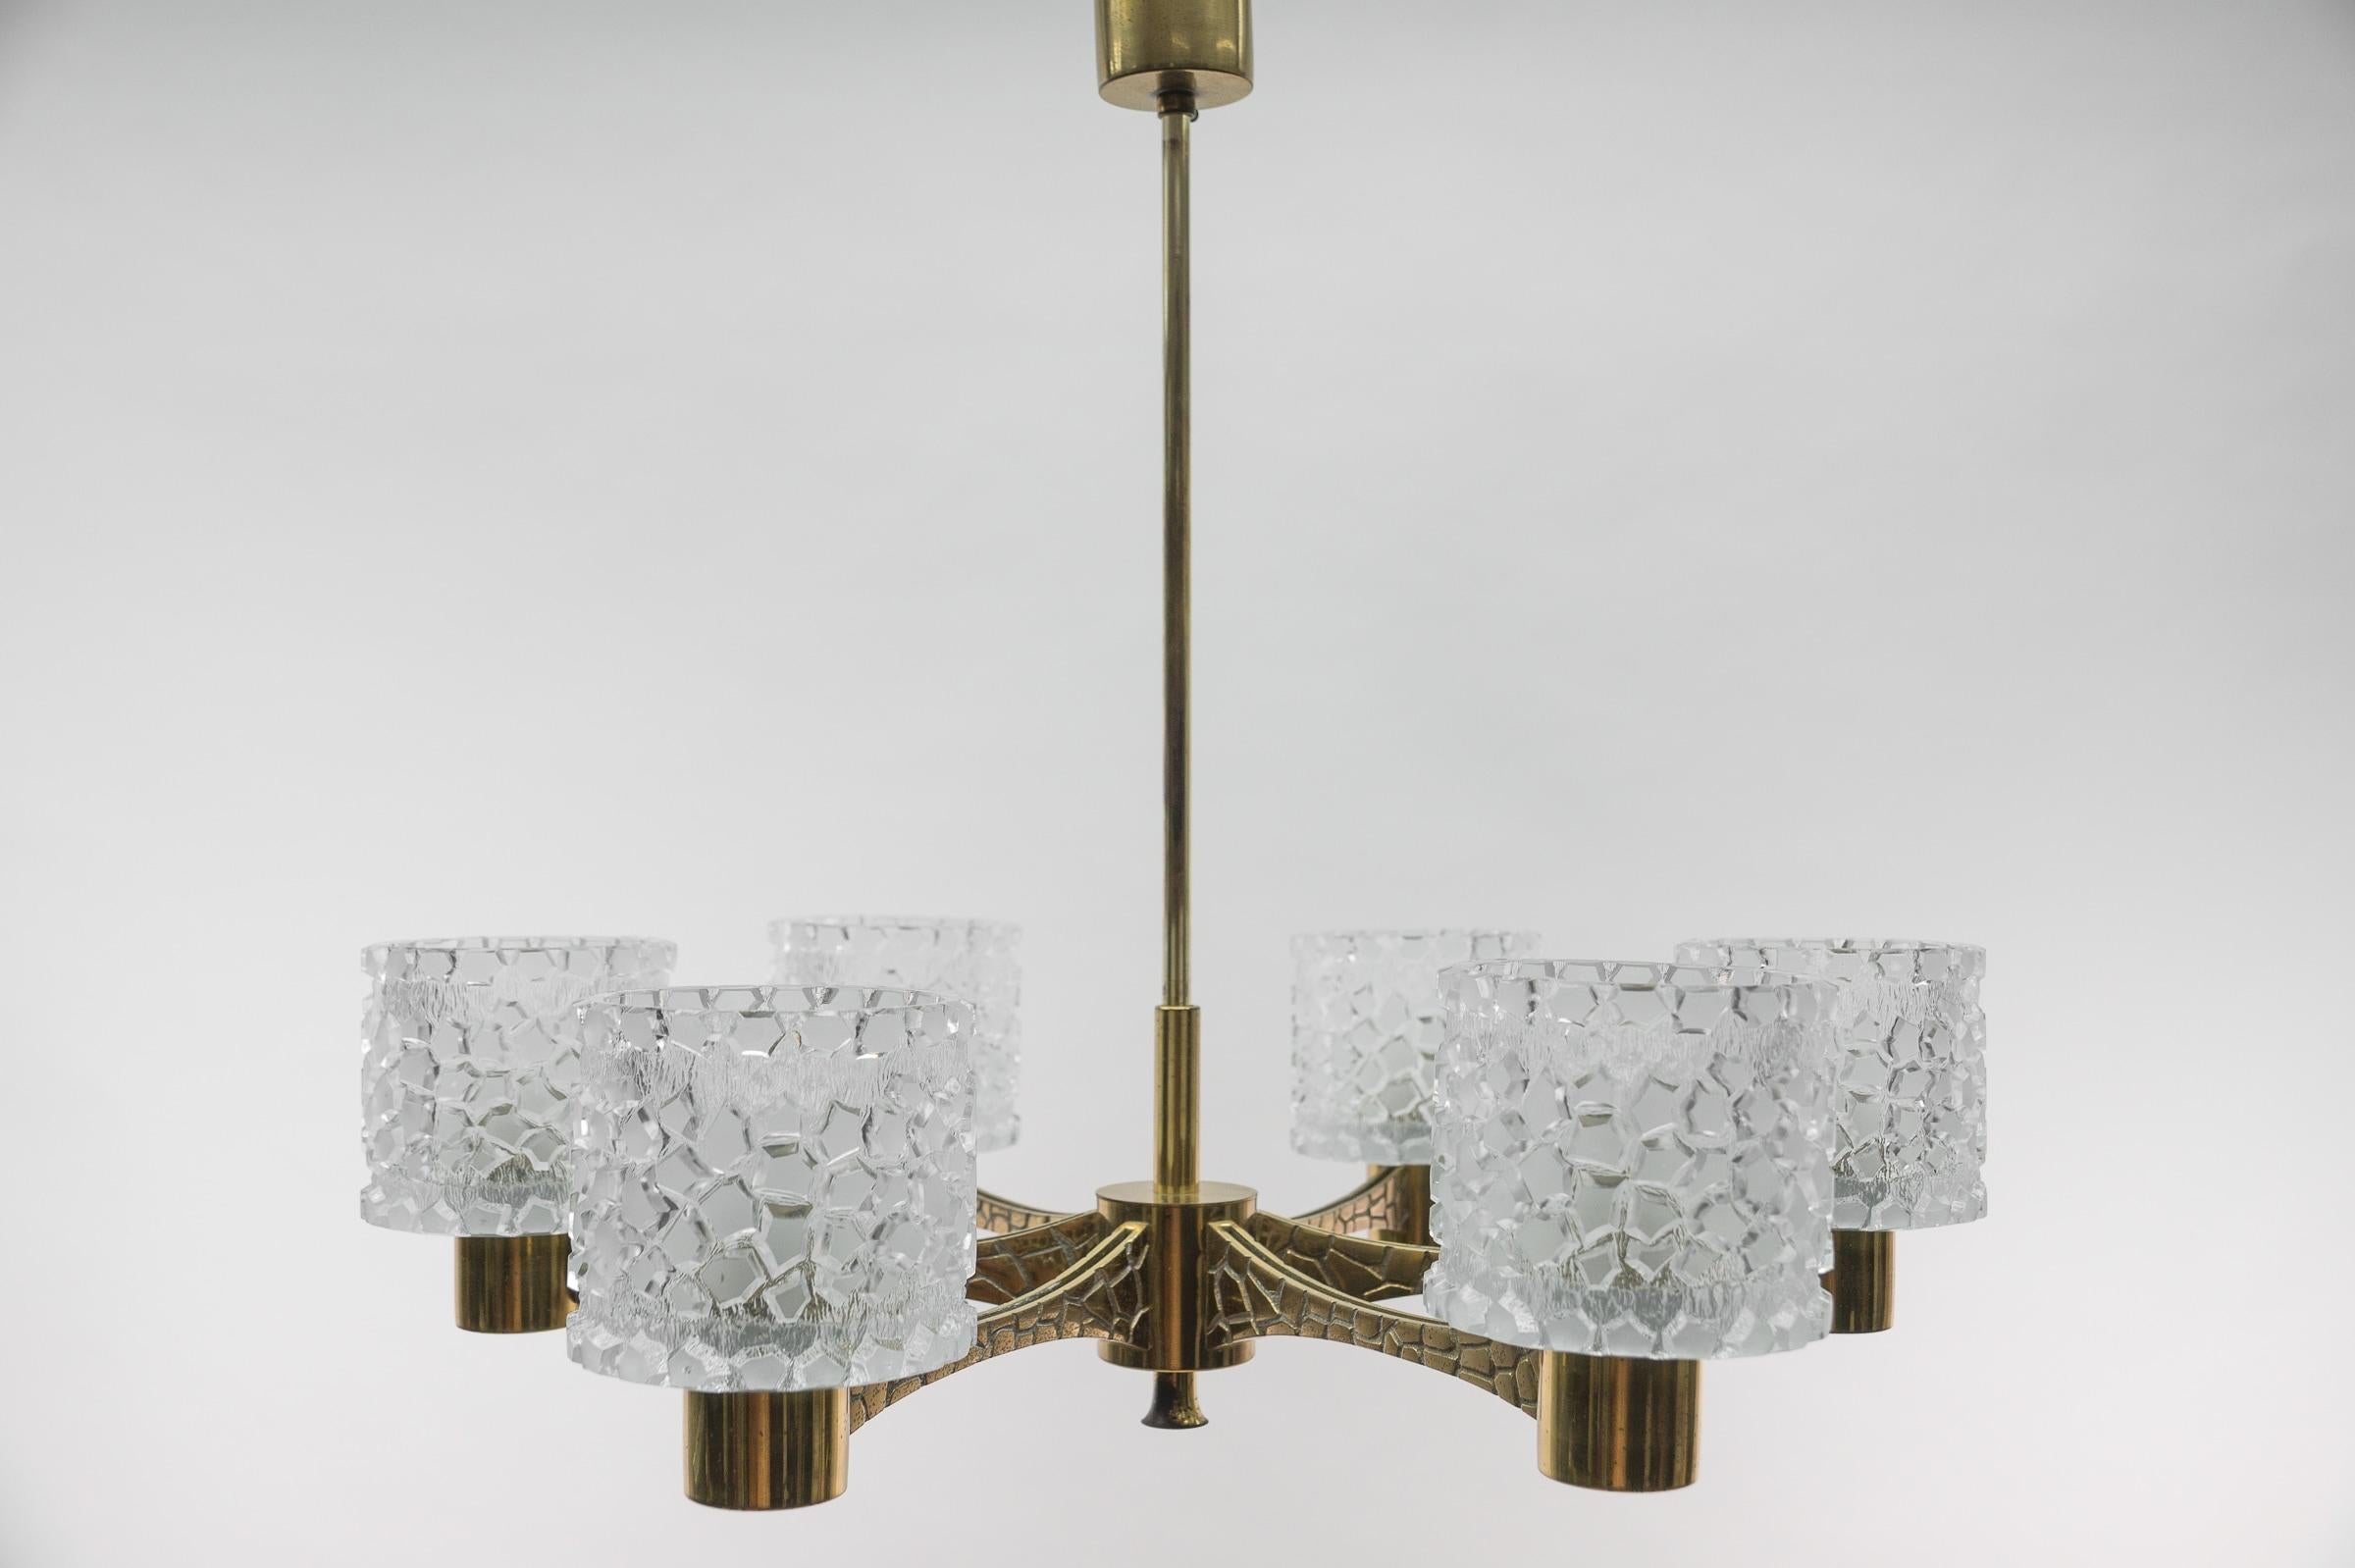 Massive brass and crystal glass Mid-Century Modern 6-armed sputnik lamp, 1950s.

Six E27 sockets. Works with 220V and 110V.

Light bulbs are not included.
It is possible to install this fixture in all countries (US, Australia, Asia, UK, Europe,..)